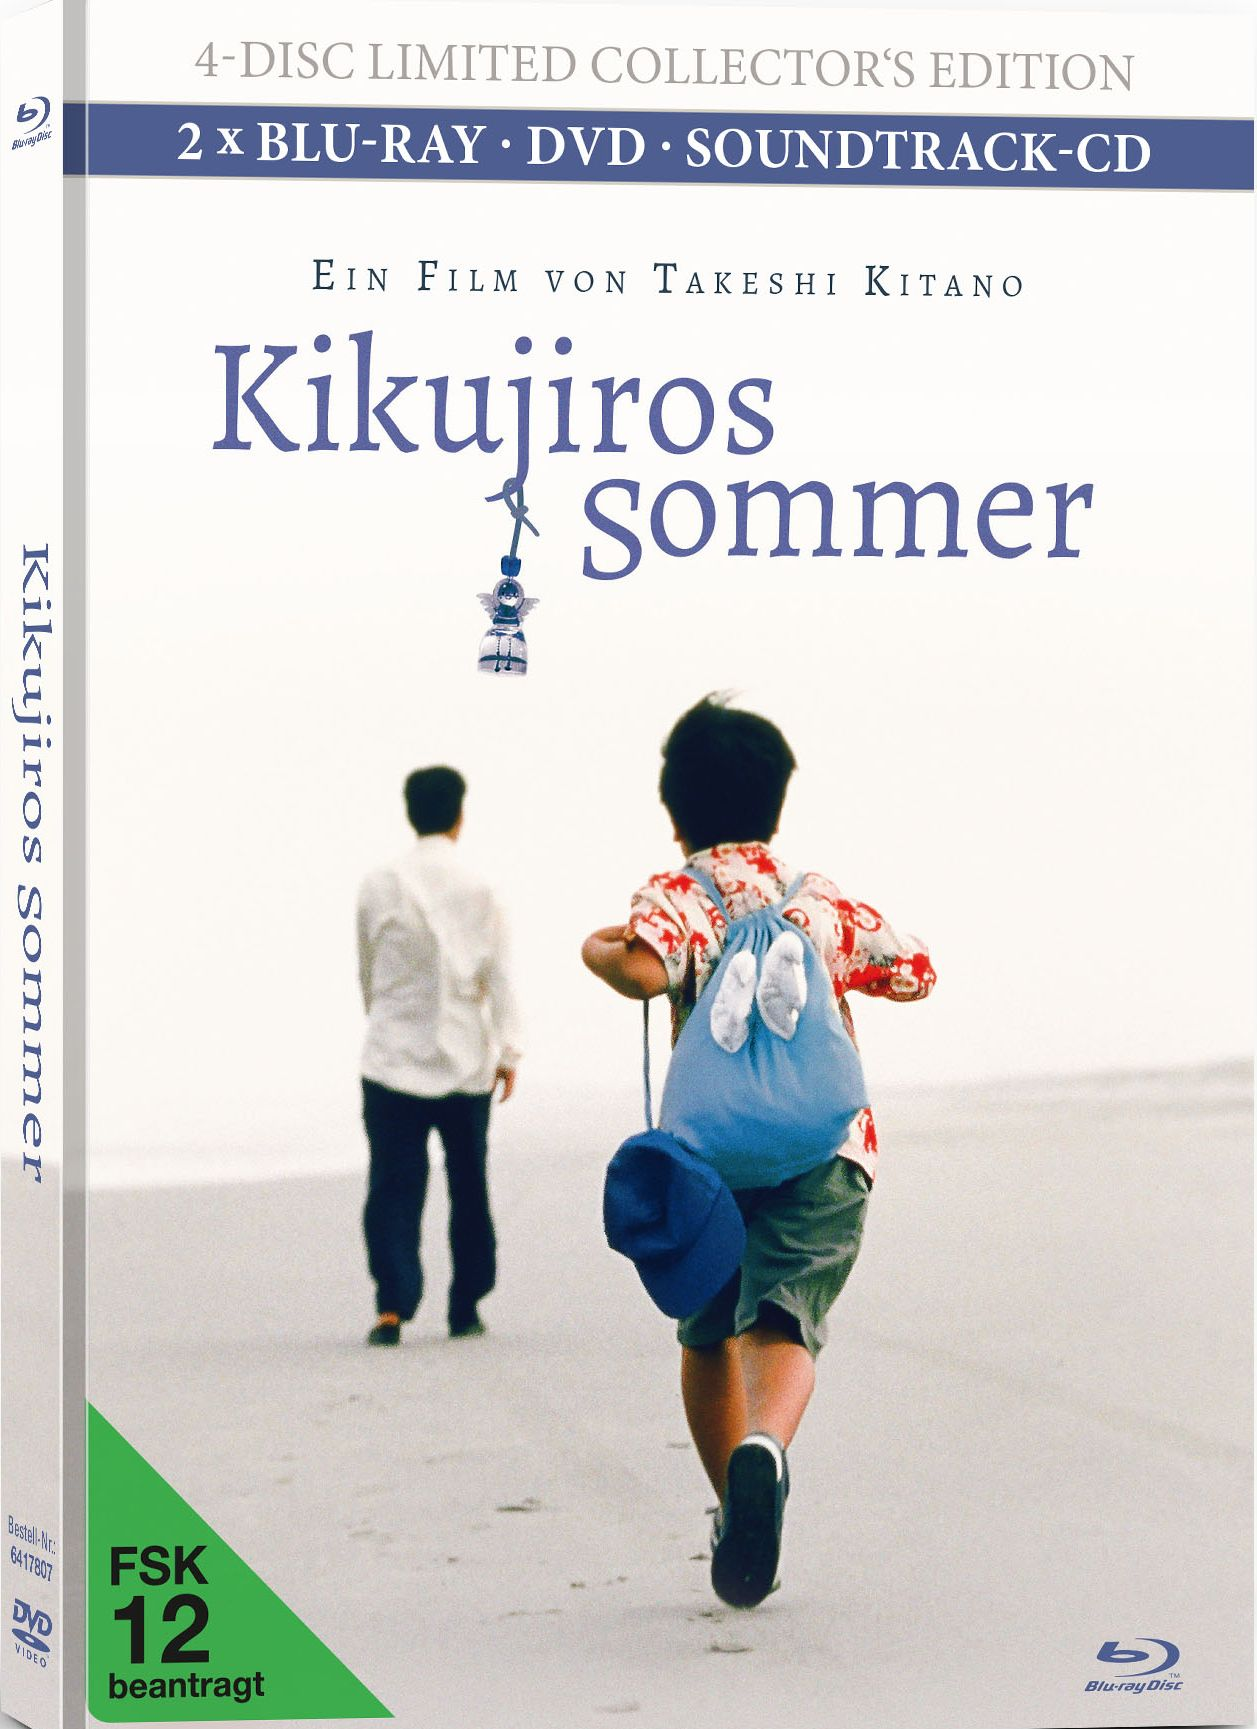 Kikujiros Sommer (4-Disc Limited Collector’s + inkl. Edition DVD Blu-ray Soundtrack-CD)